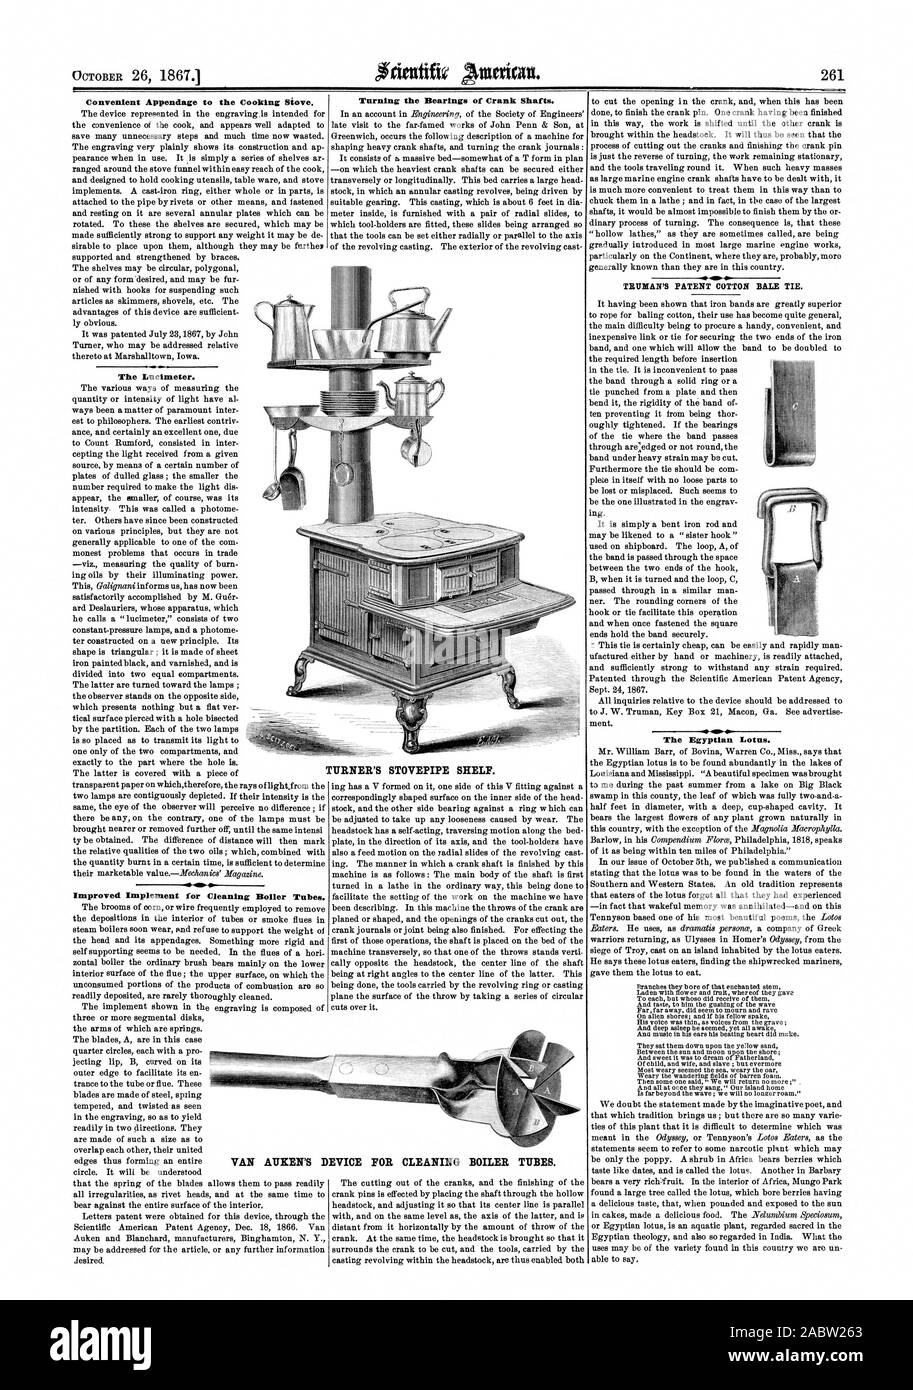 Convenient Appendage to the Cooking Stove. The Lueimeter. Improved Implement for Cleaning Boiler Tubes. Turning the Bearings of Crank Shafts. TURNER'S STOVEPIPE SHELF. TRUMAN'S PATENT COTTON BALE TIE. The Egyptian Lotus. VAN AUKEN'S DEVICE FOR CLEANING BOILER TUBES., scientific american, 1867-10-26 Stock Photo